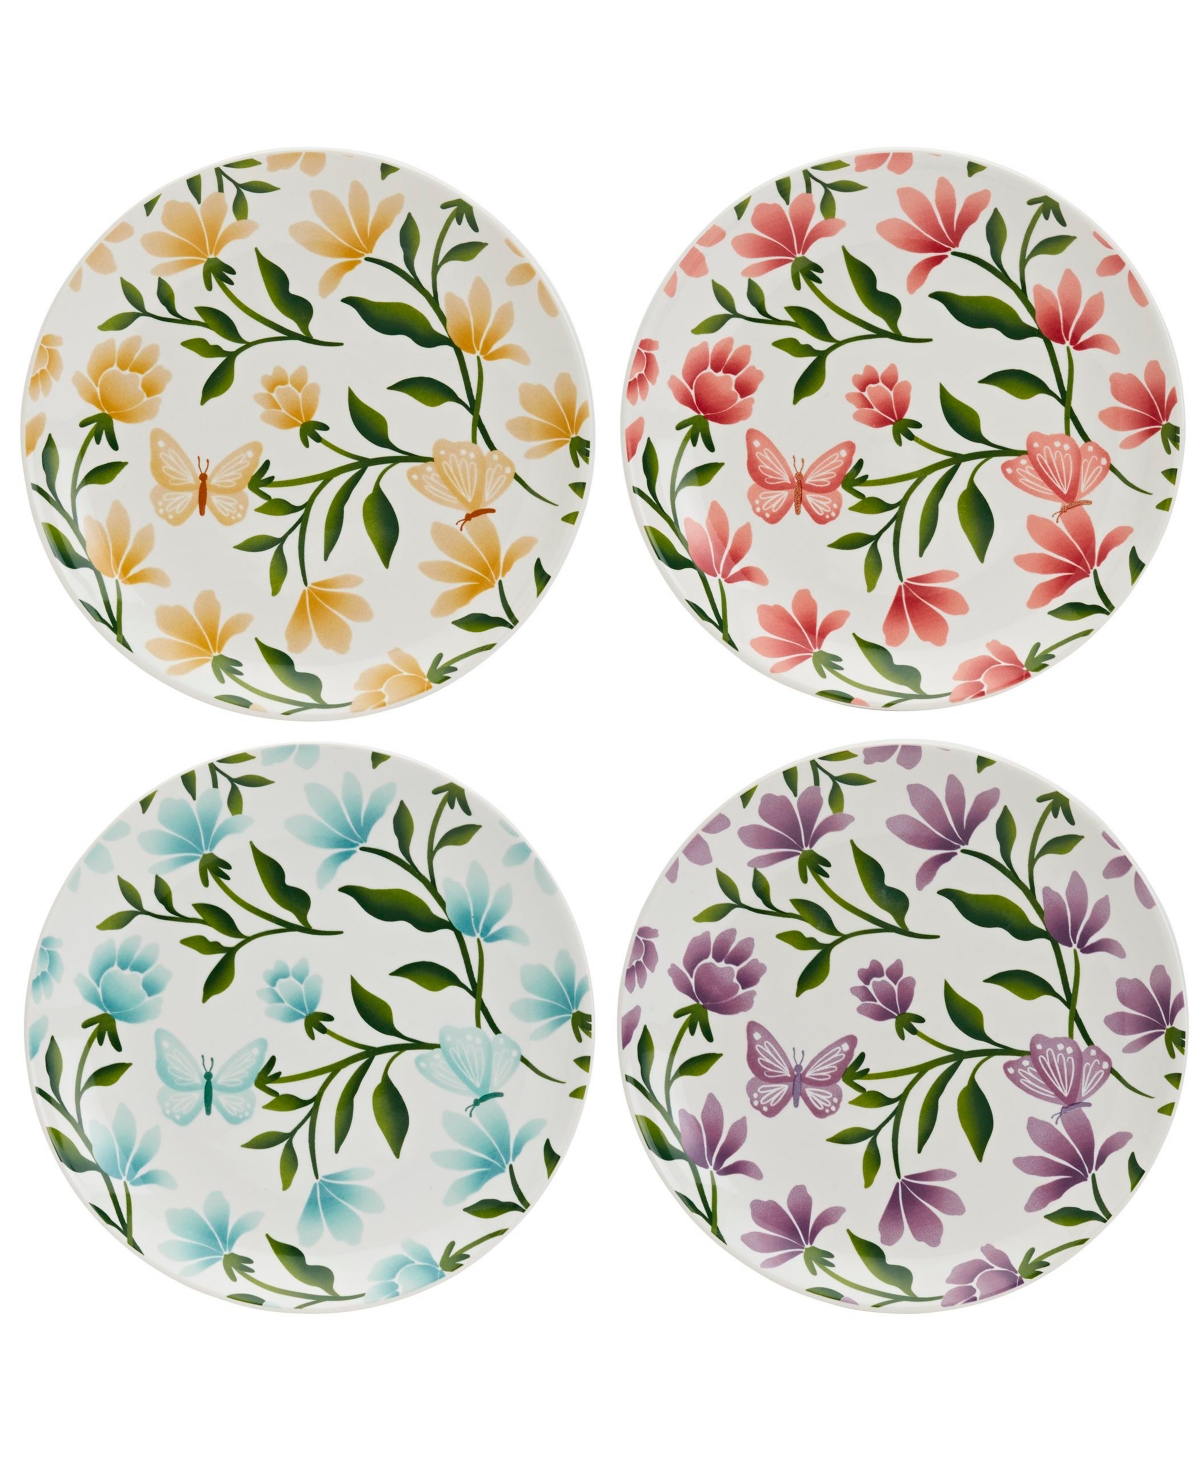 Dolly Parton 8 Floral Butterfly Salad Plates, Set of 4